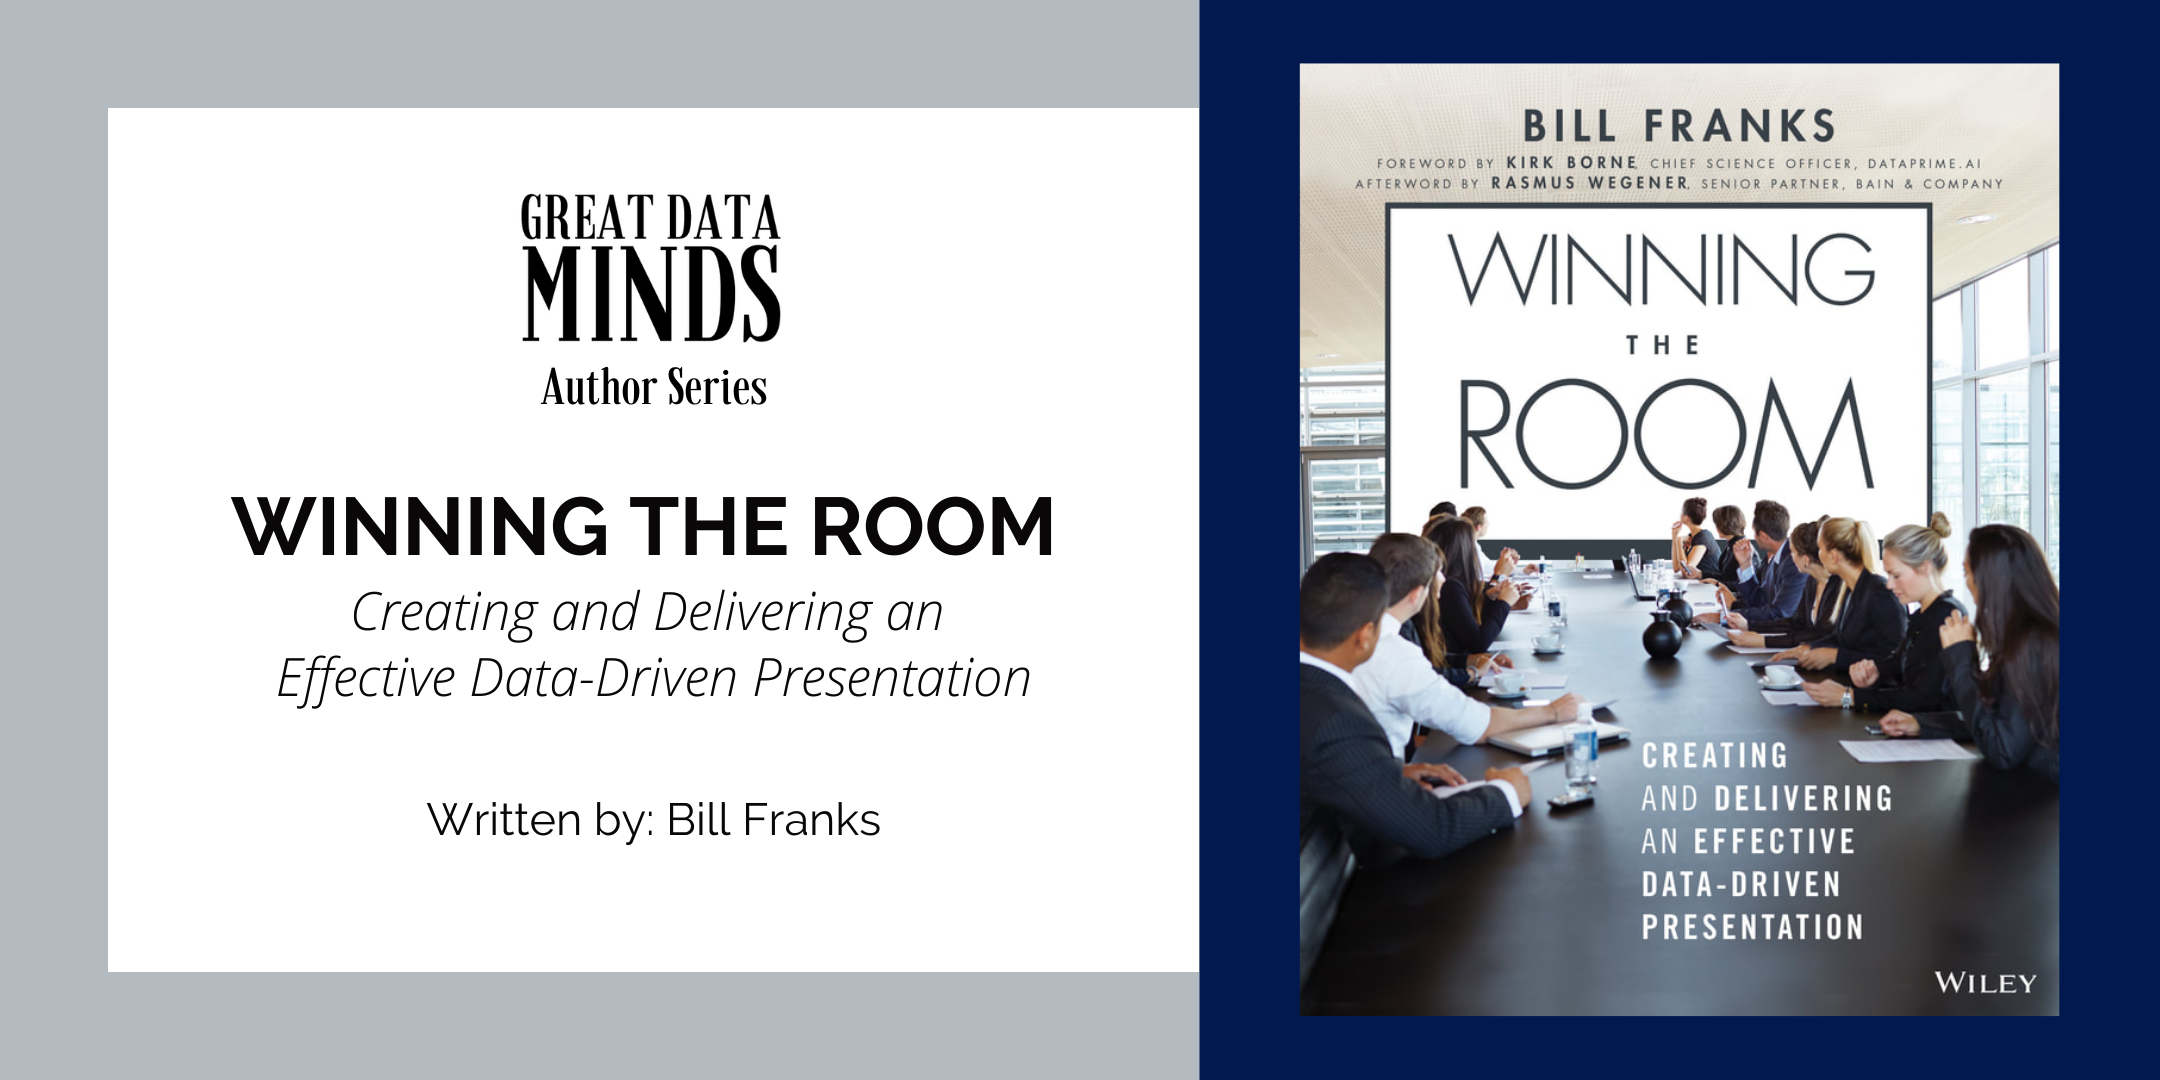 author series: "winning the room" by bill franks